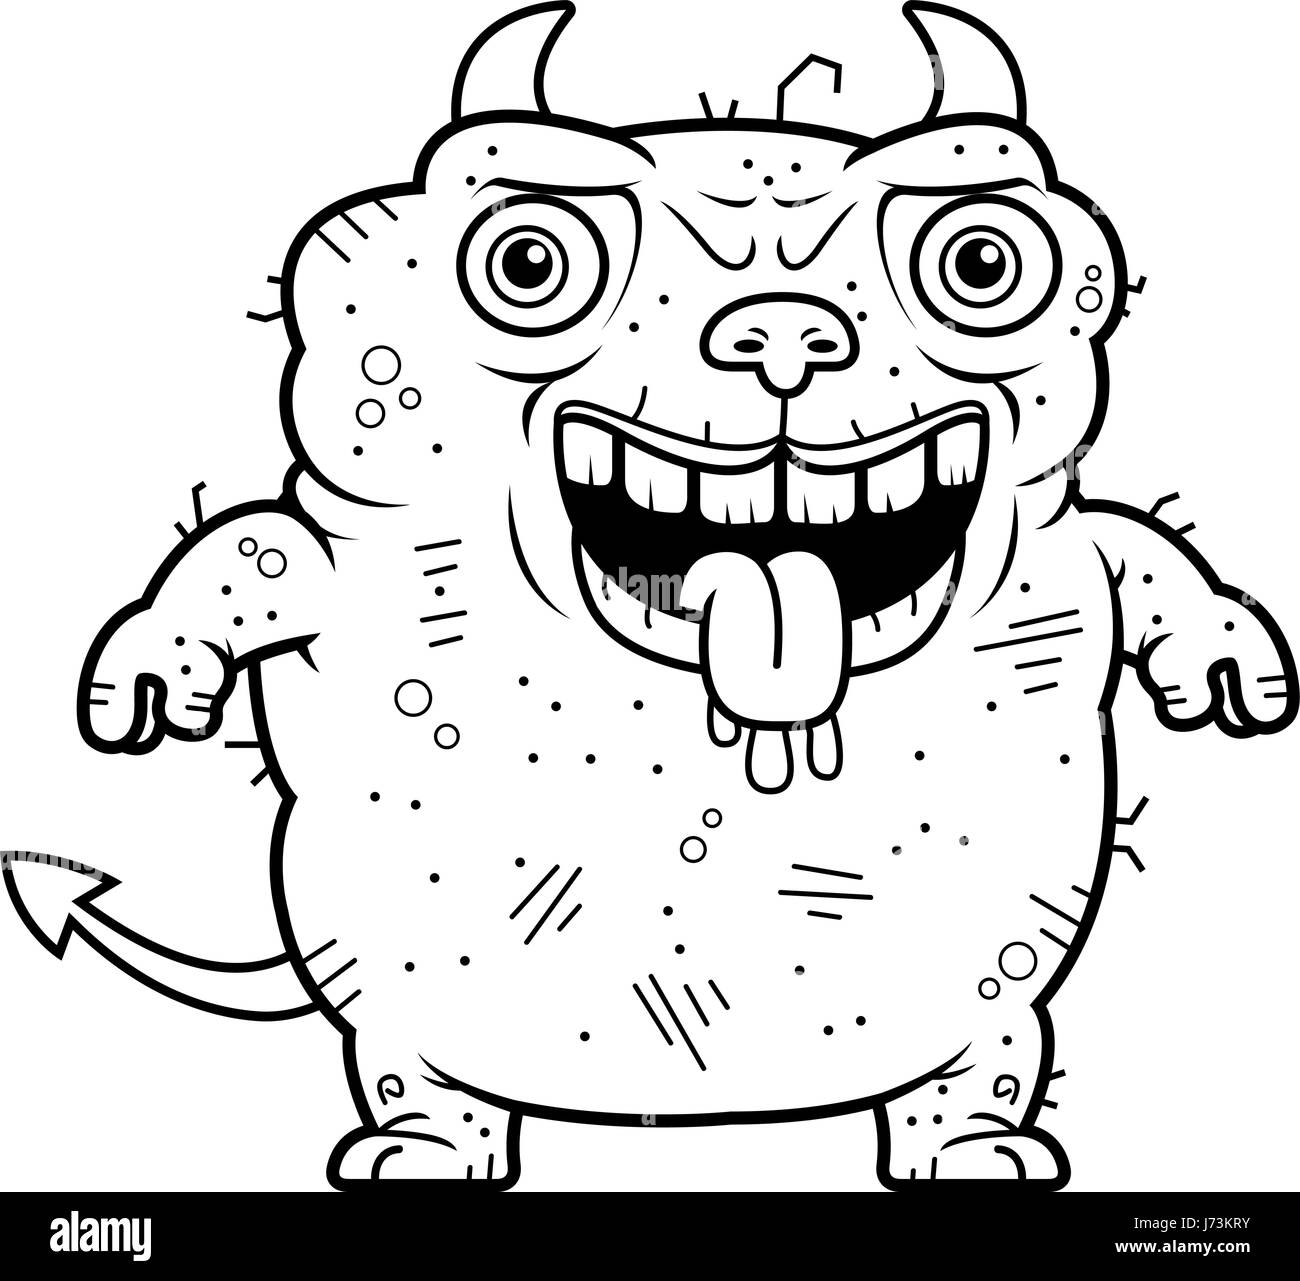 Monster ugly Black and White Stock Photos & Images - Alamy